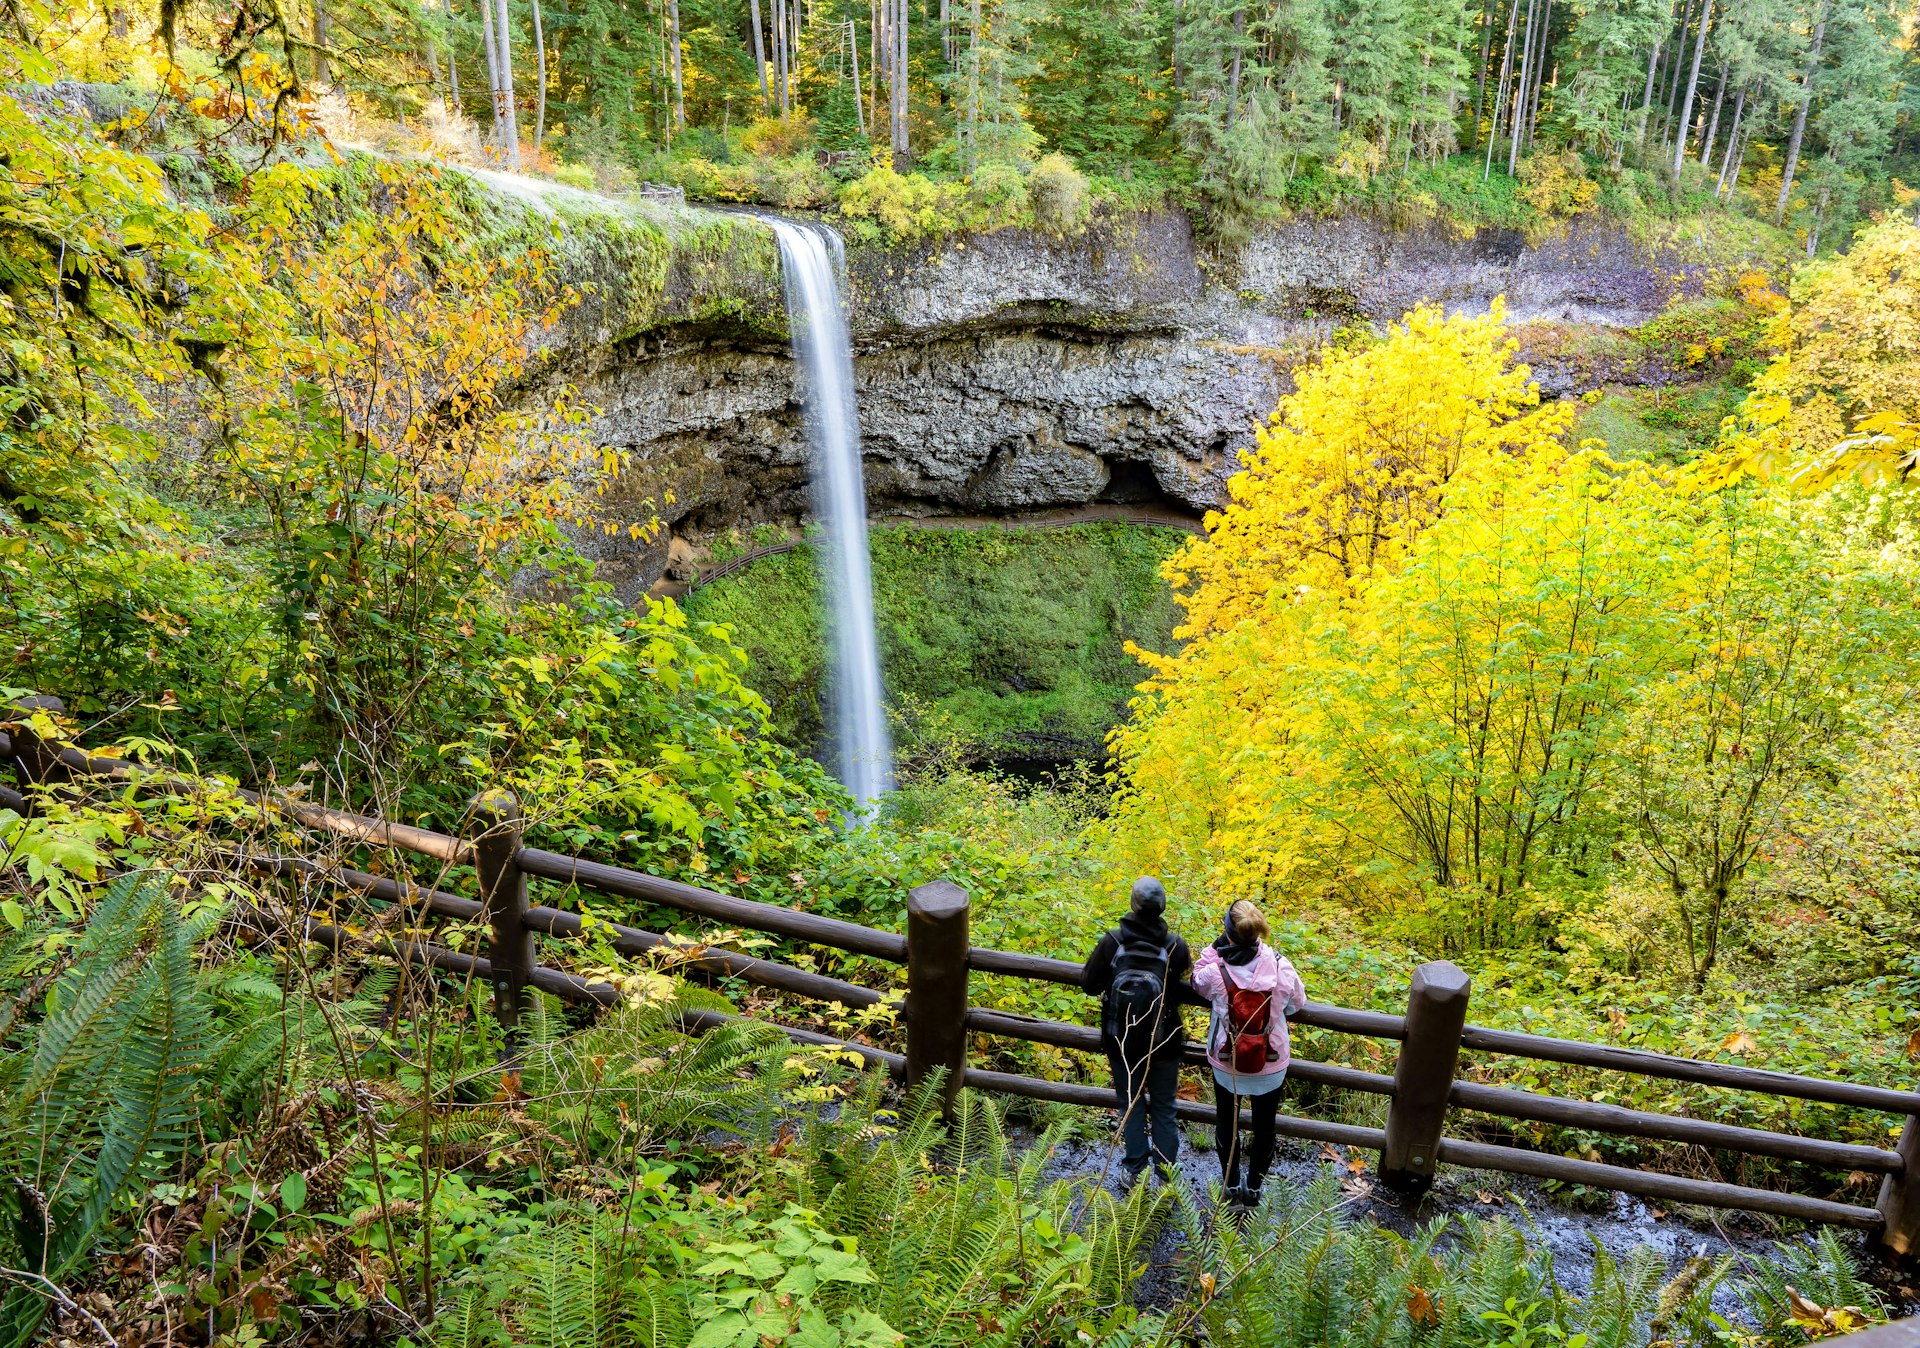 Two women looking at South falls and trees in autumn season showing fall colors, in Silver Falls State Park near Silverton, Oregon